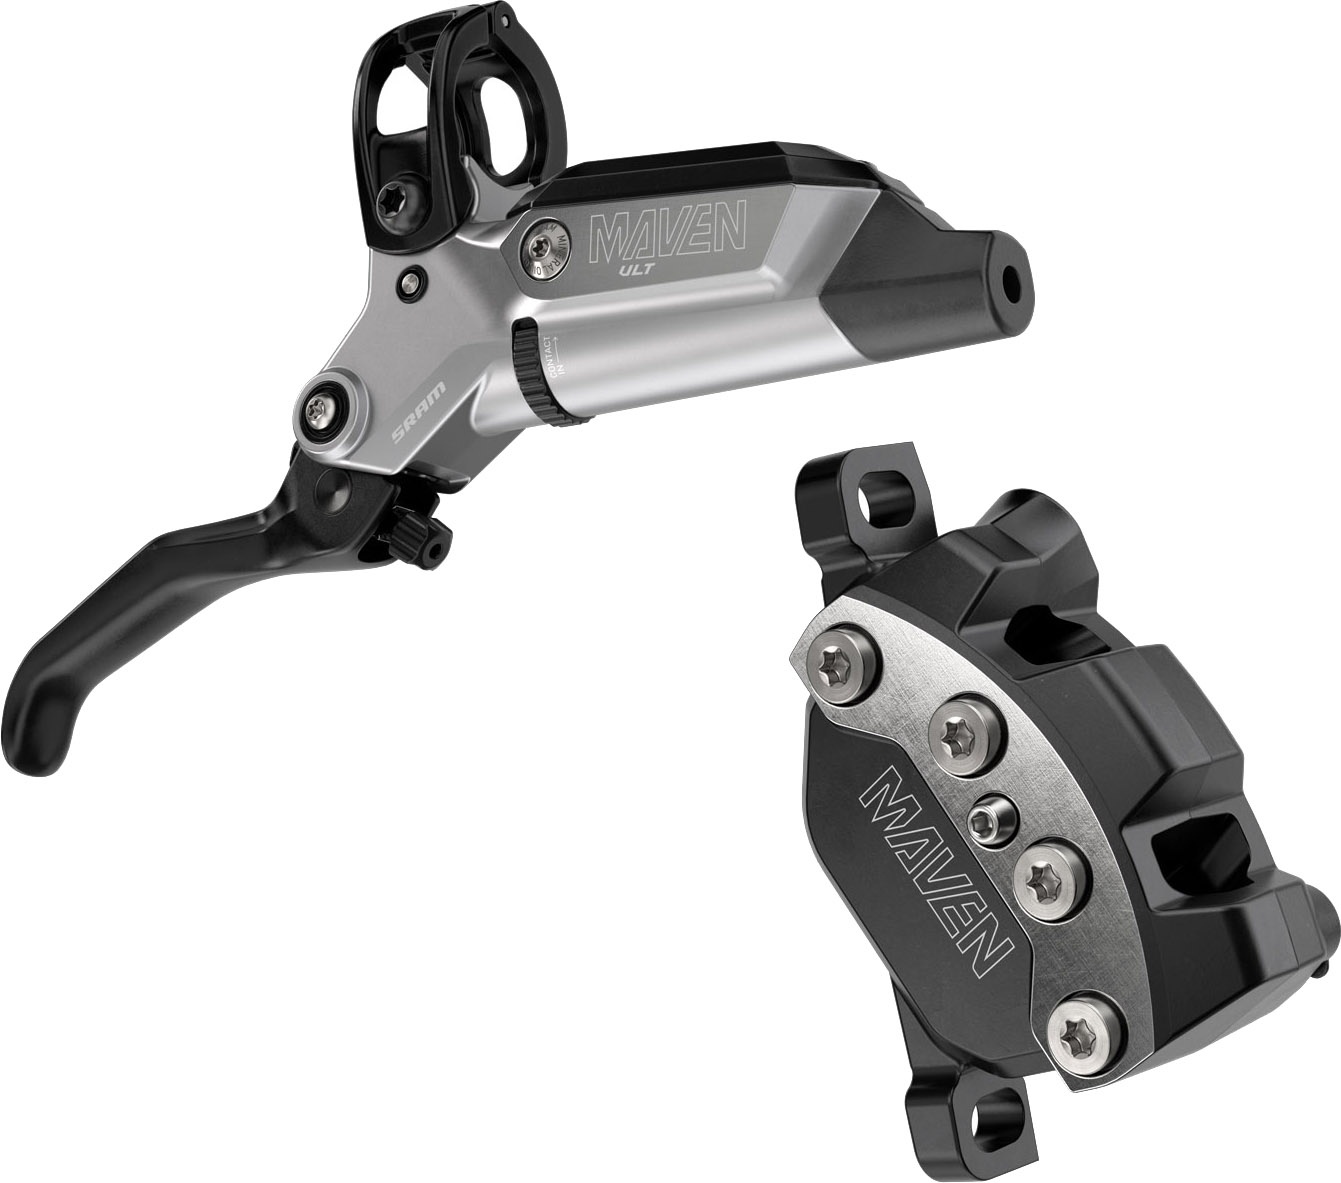 Reservedele - Bremser - SRAM Hydraulic Disc Brake Maven Ultimate Stealth [REAR] - Clear Anodized